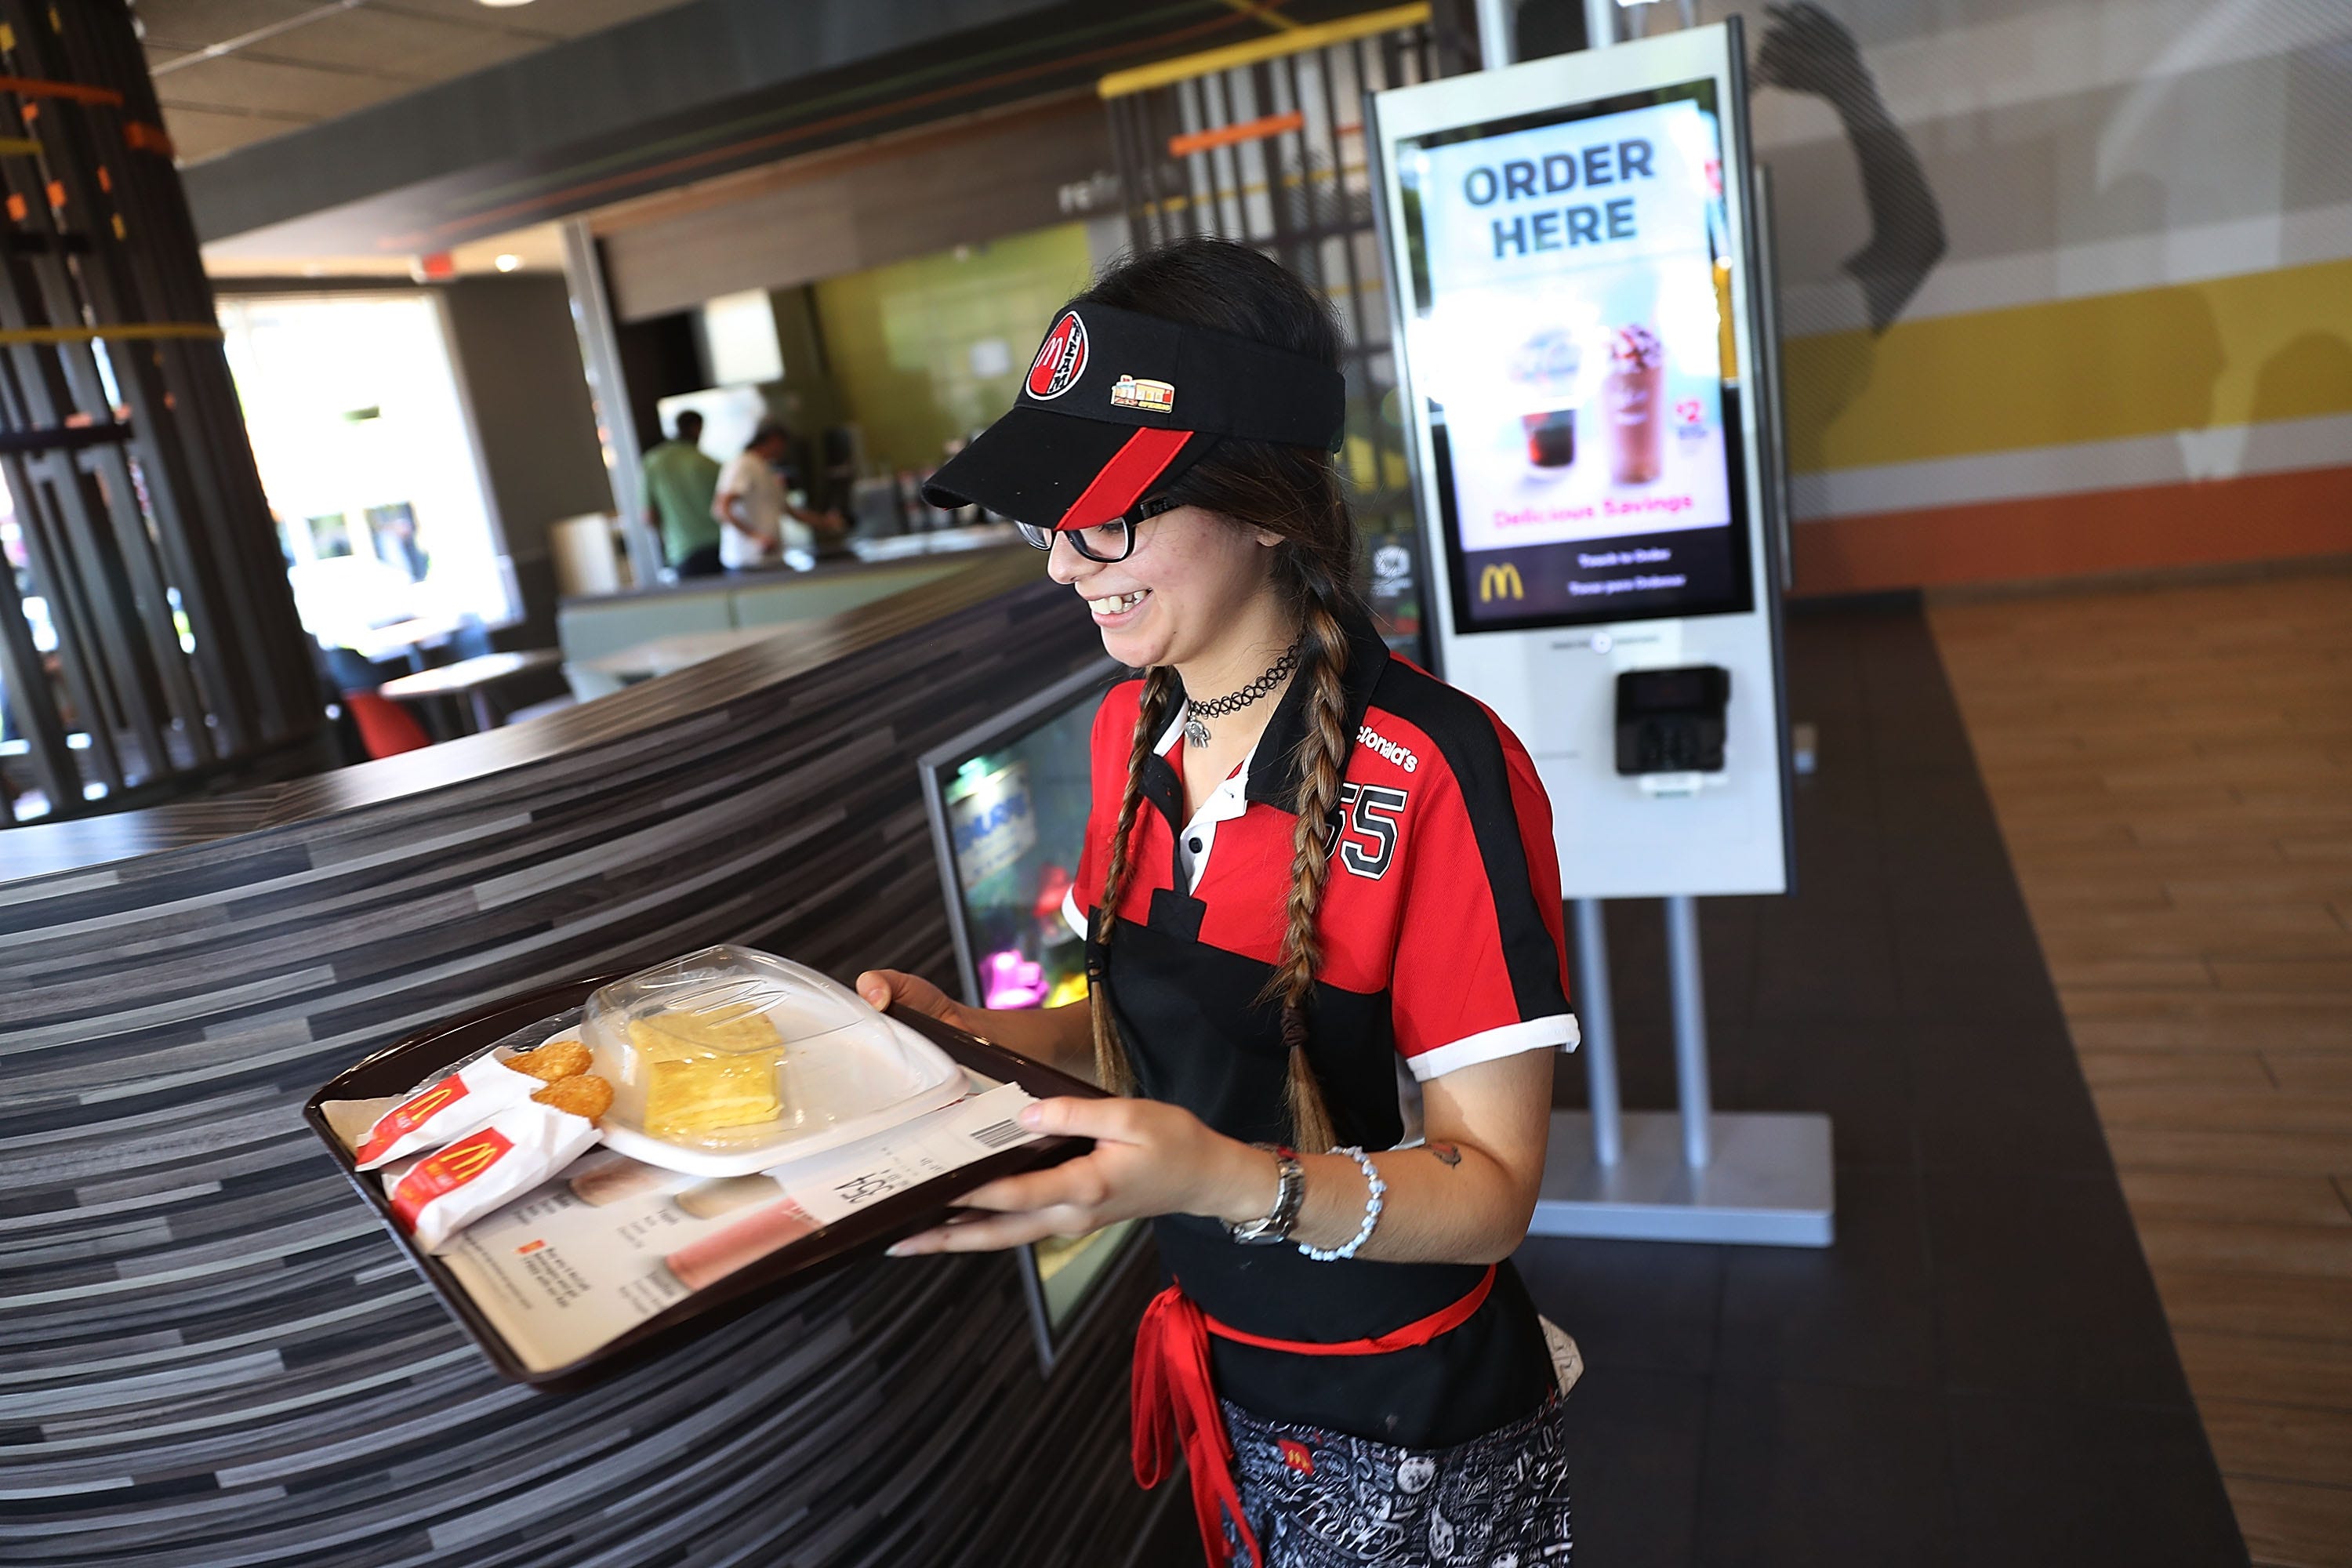 McDonald's fast-food ordering kiosks will boost sales, analyst says